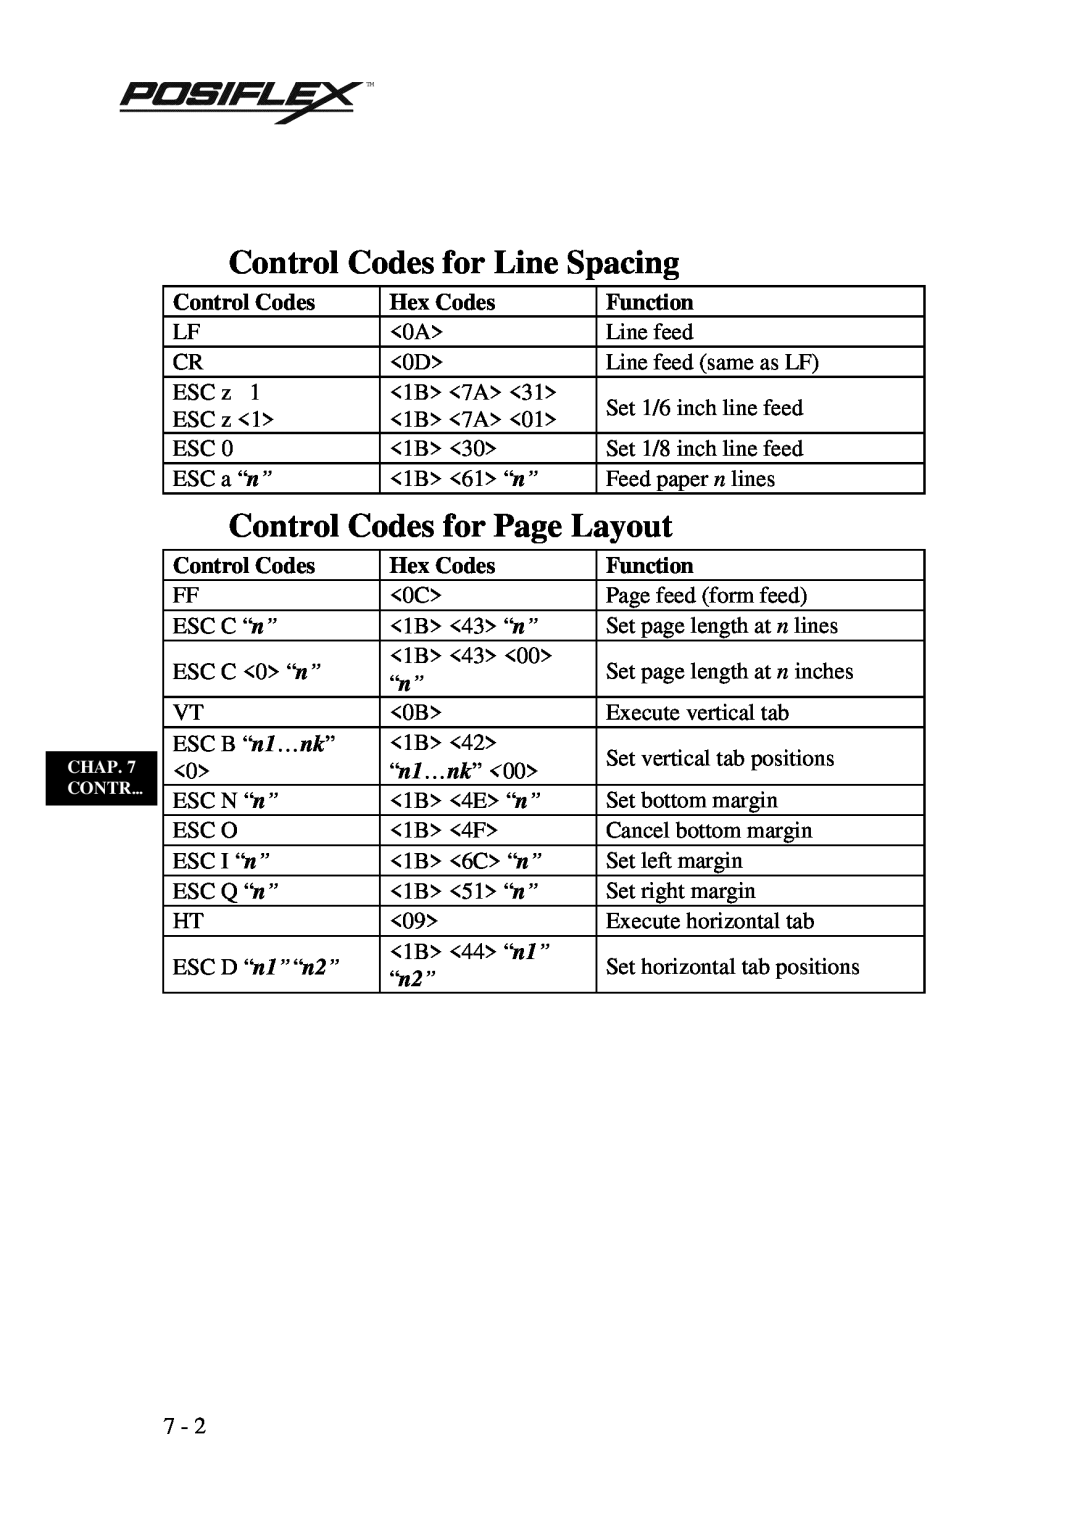 POSIFLEX Business Machines PP3000 Control Codes for Line Spacing, Control Codes for Page Layout, Hex Codes, Function, “n2” 